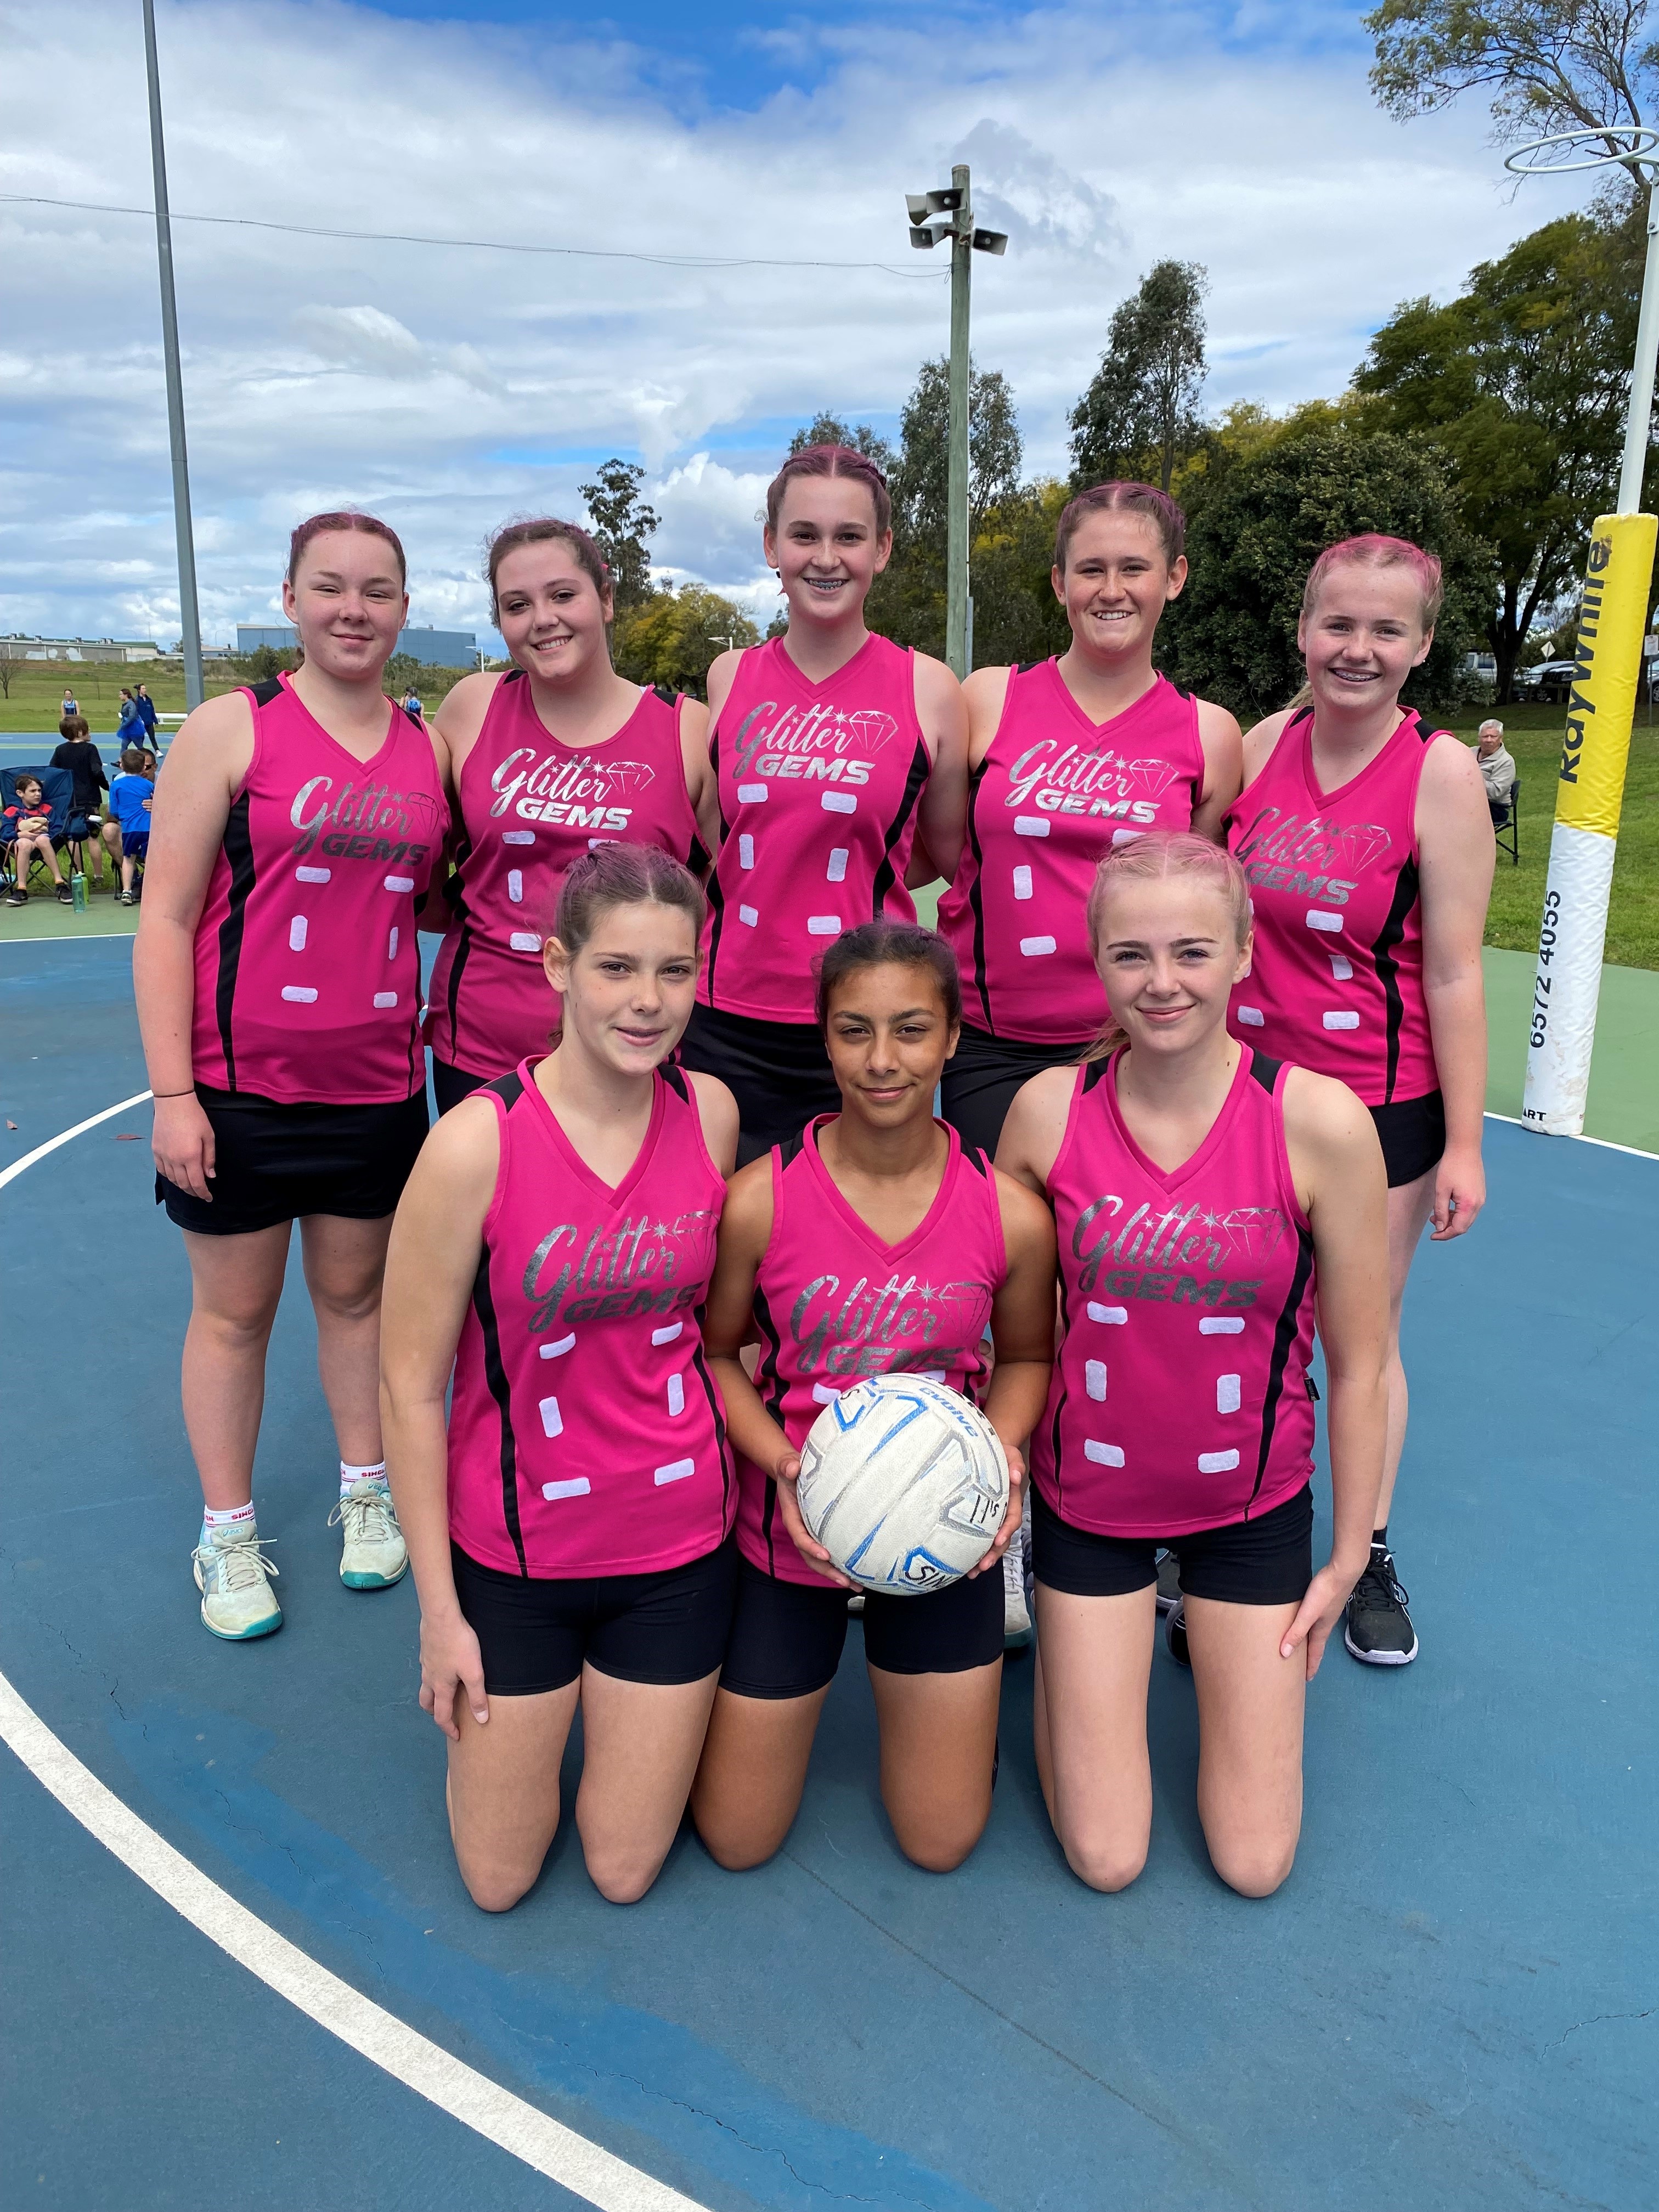 Thrilling grand final wins for Titans and Mermaids